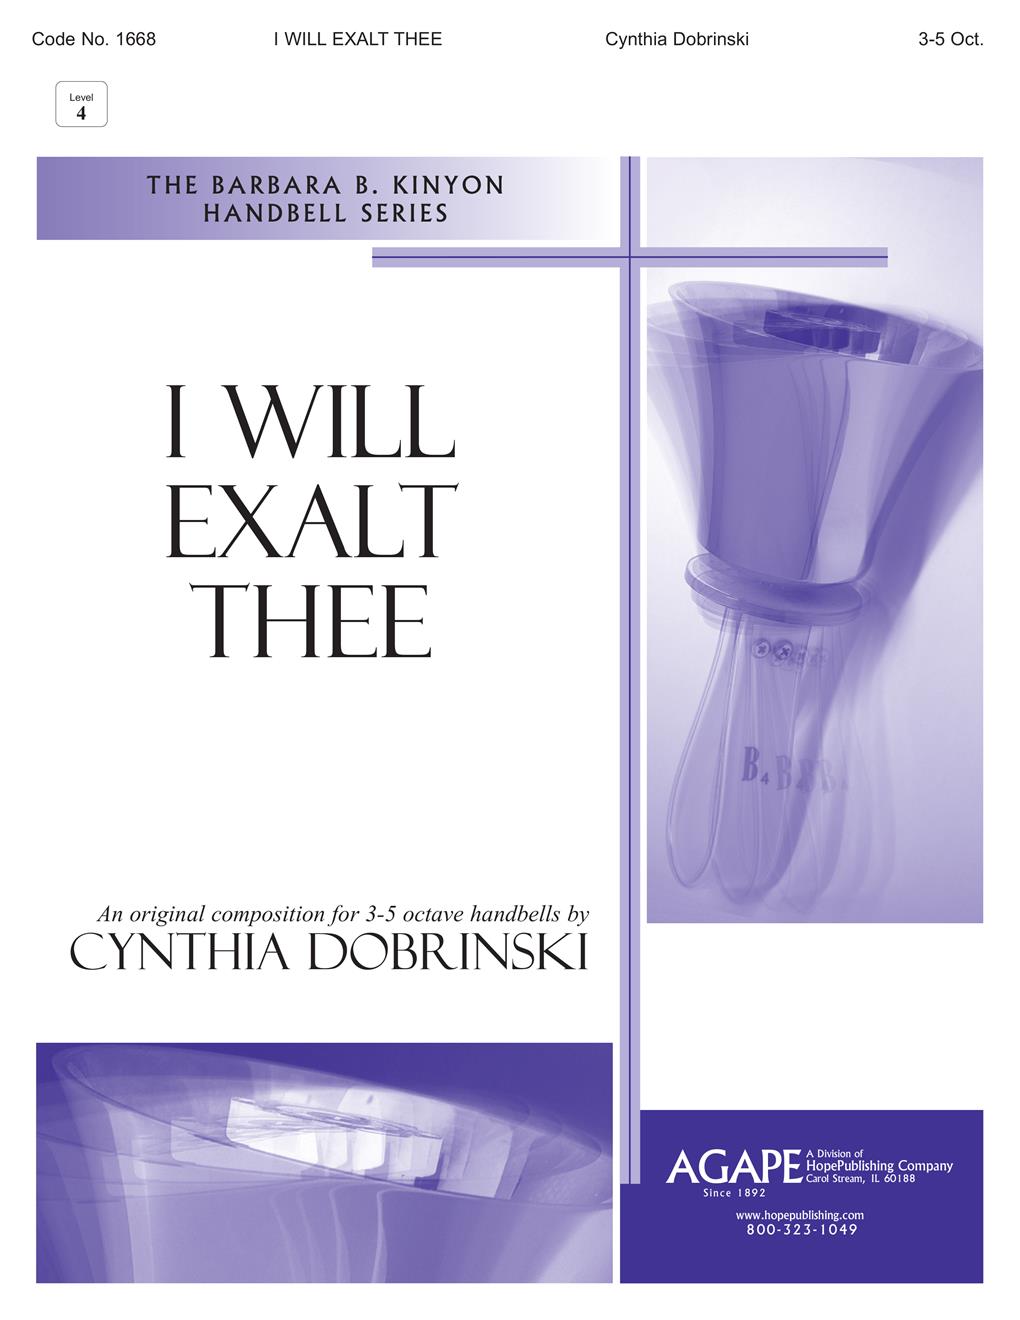 I Will Exalt Thee - 3-5 Oct. Cover Image